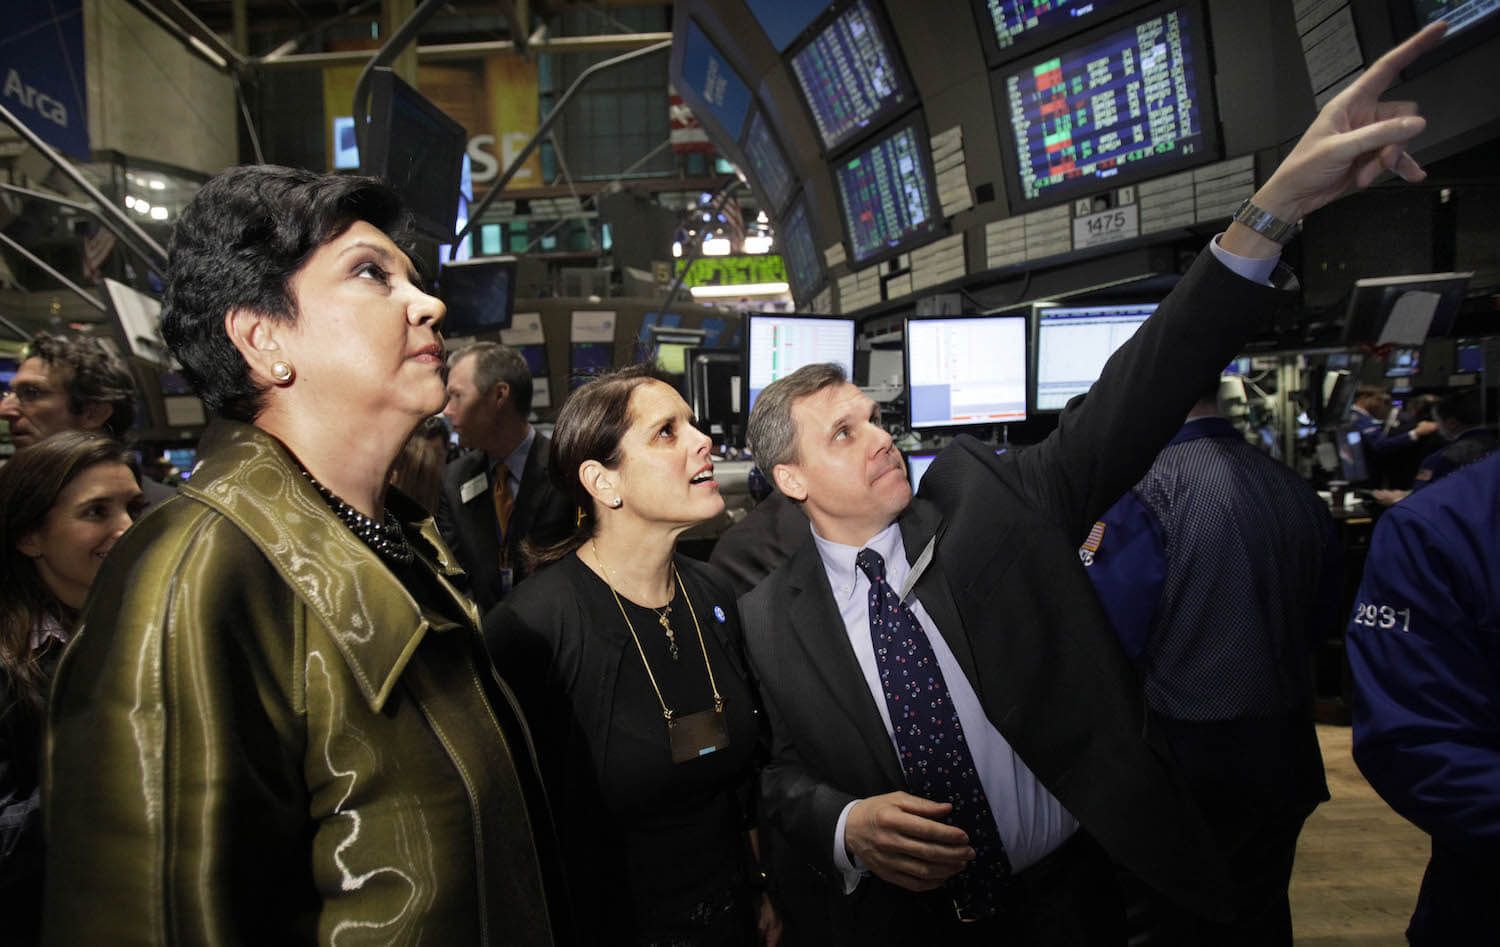 PepsiCo Inc. chairman and chief executive Indra K. Nooyi, left, and Jill Beraud, PepsiCo president of sparkling brands, meet with Barclays Capital investor relations representative Carmen Barone, right, at the post that trades Pepsi on the floor of the New York Stock Exchange Monday, Feb. 1, 2010. (AP Photo/Richard Drew)